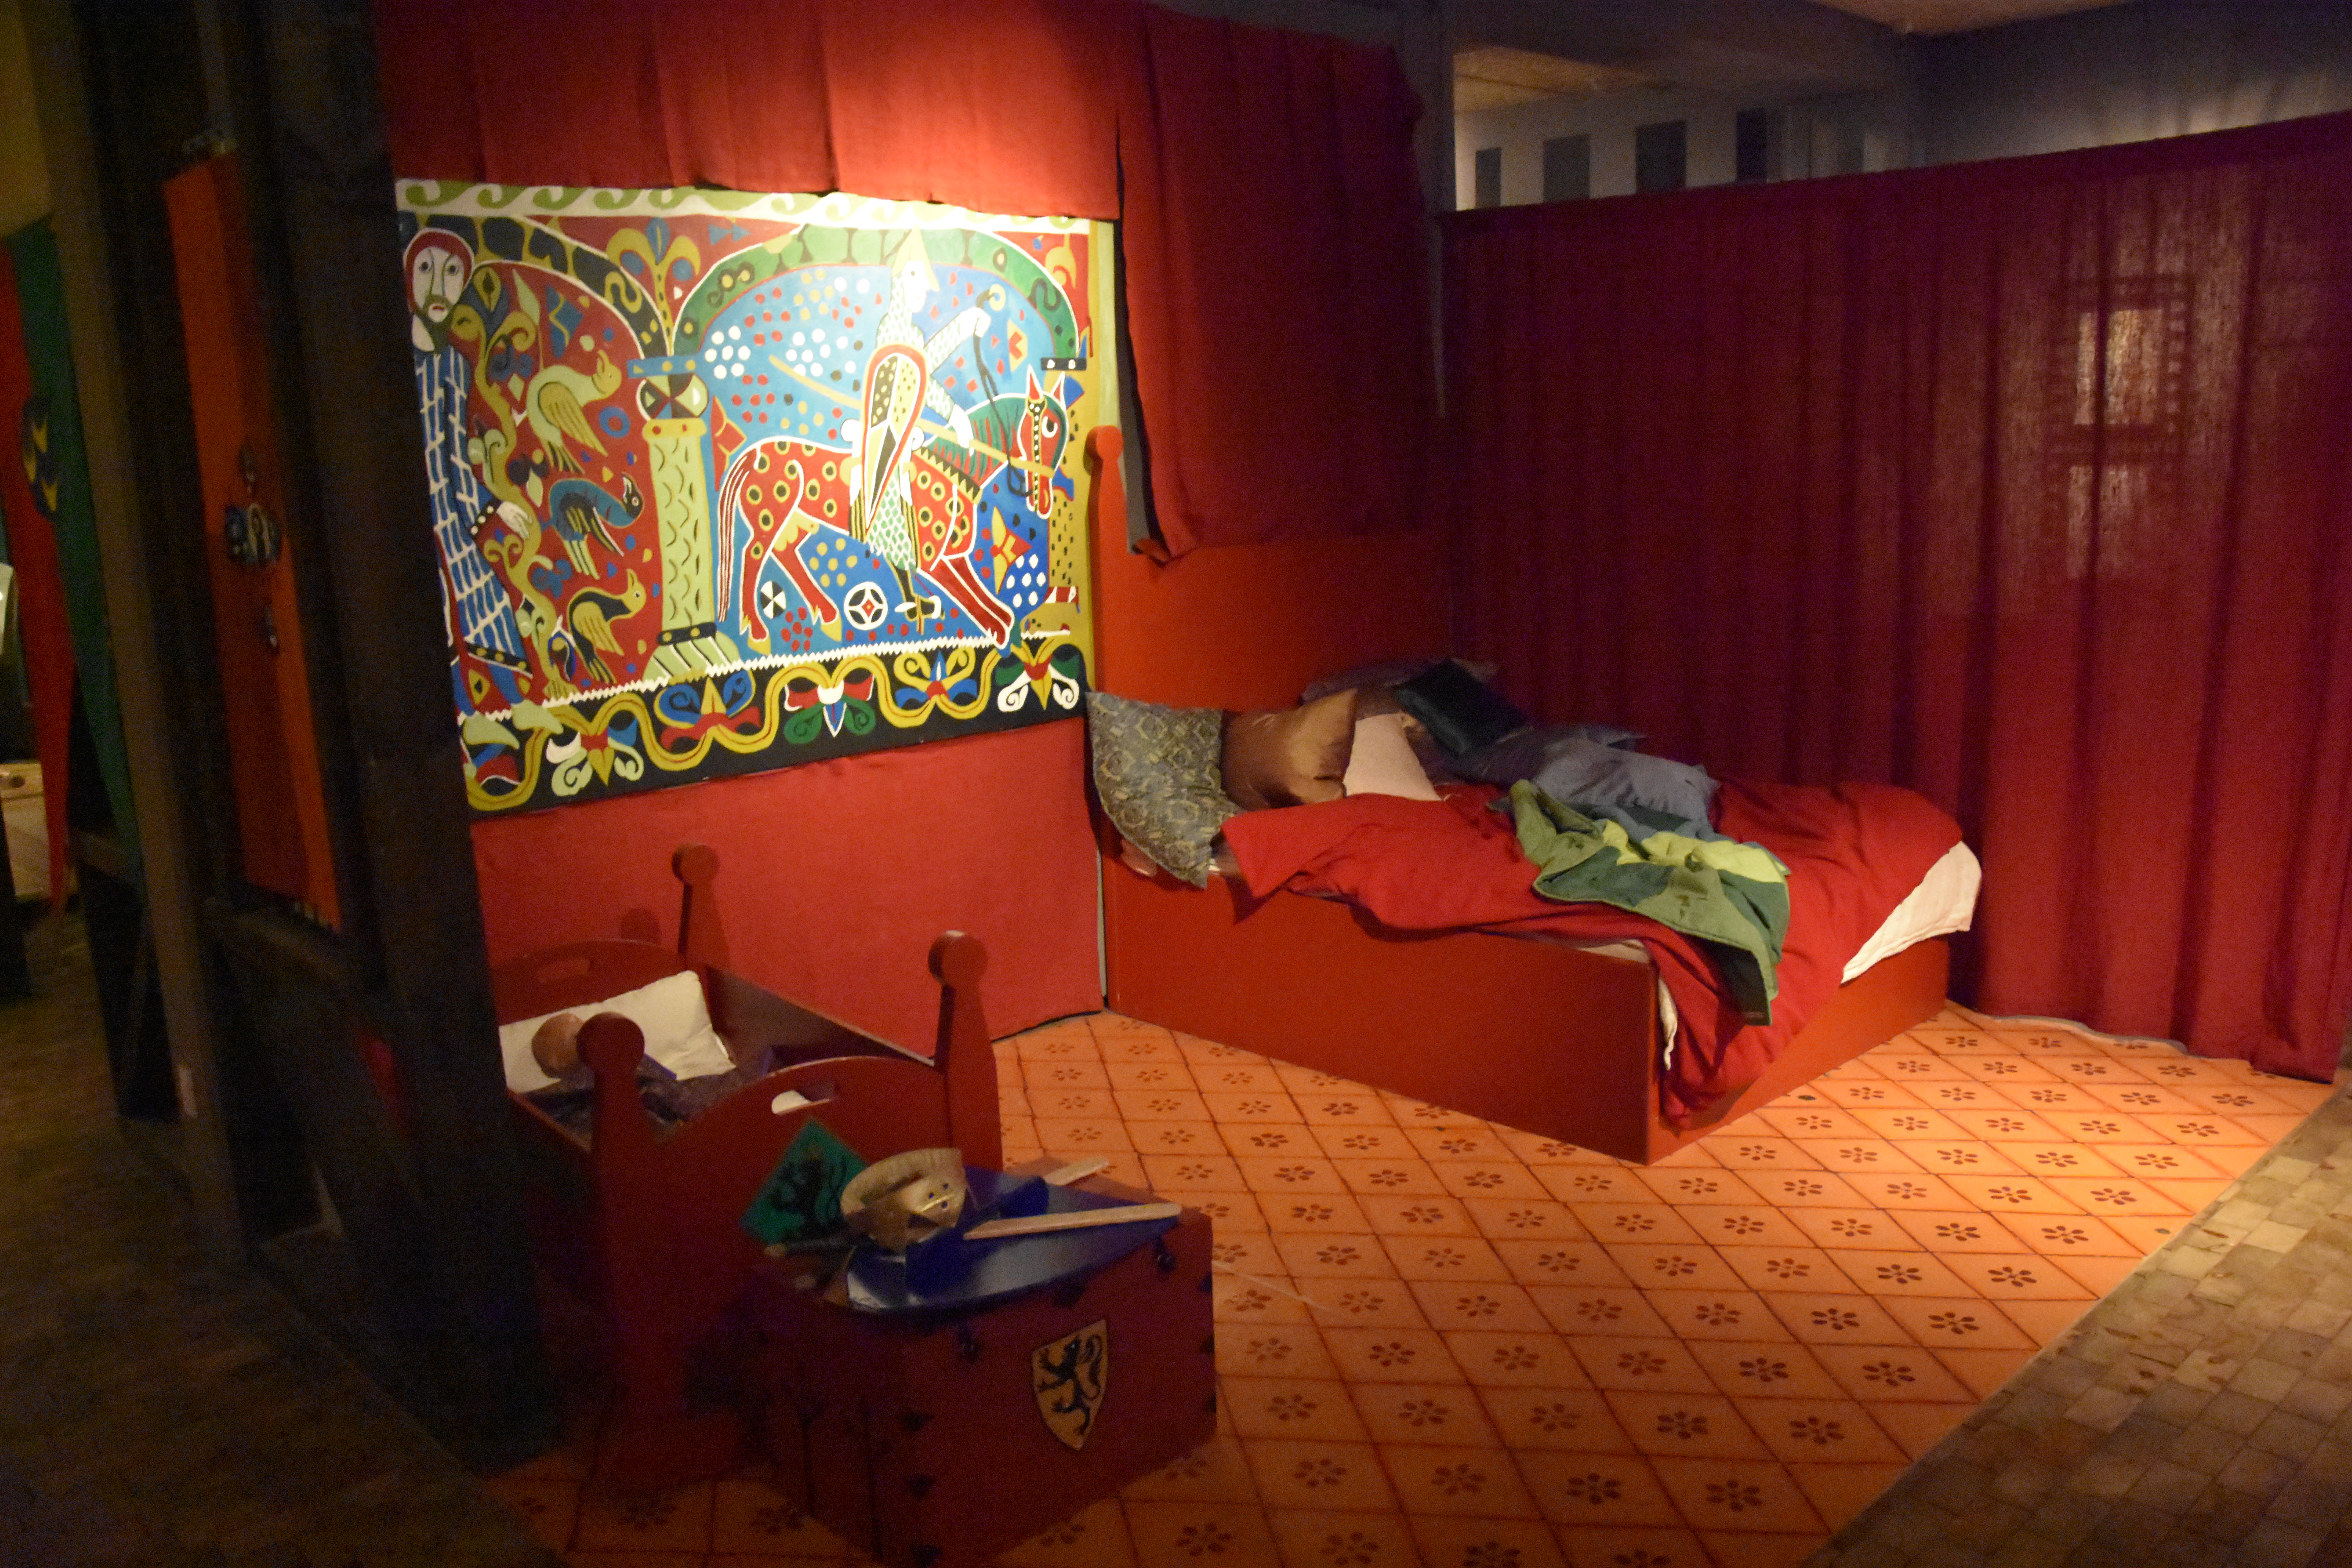 Children can pretend to live in a castle at the Ribe Viking Museum in Ribe, Denmark